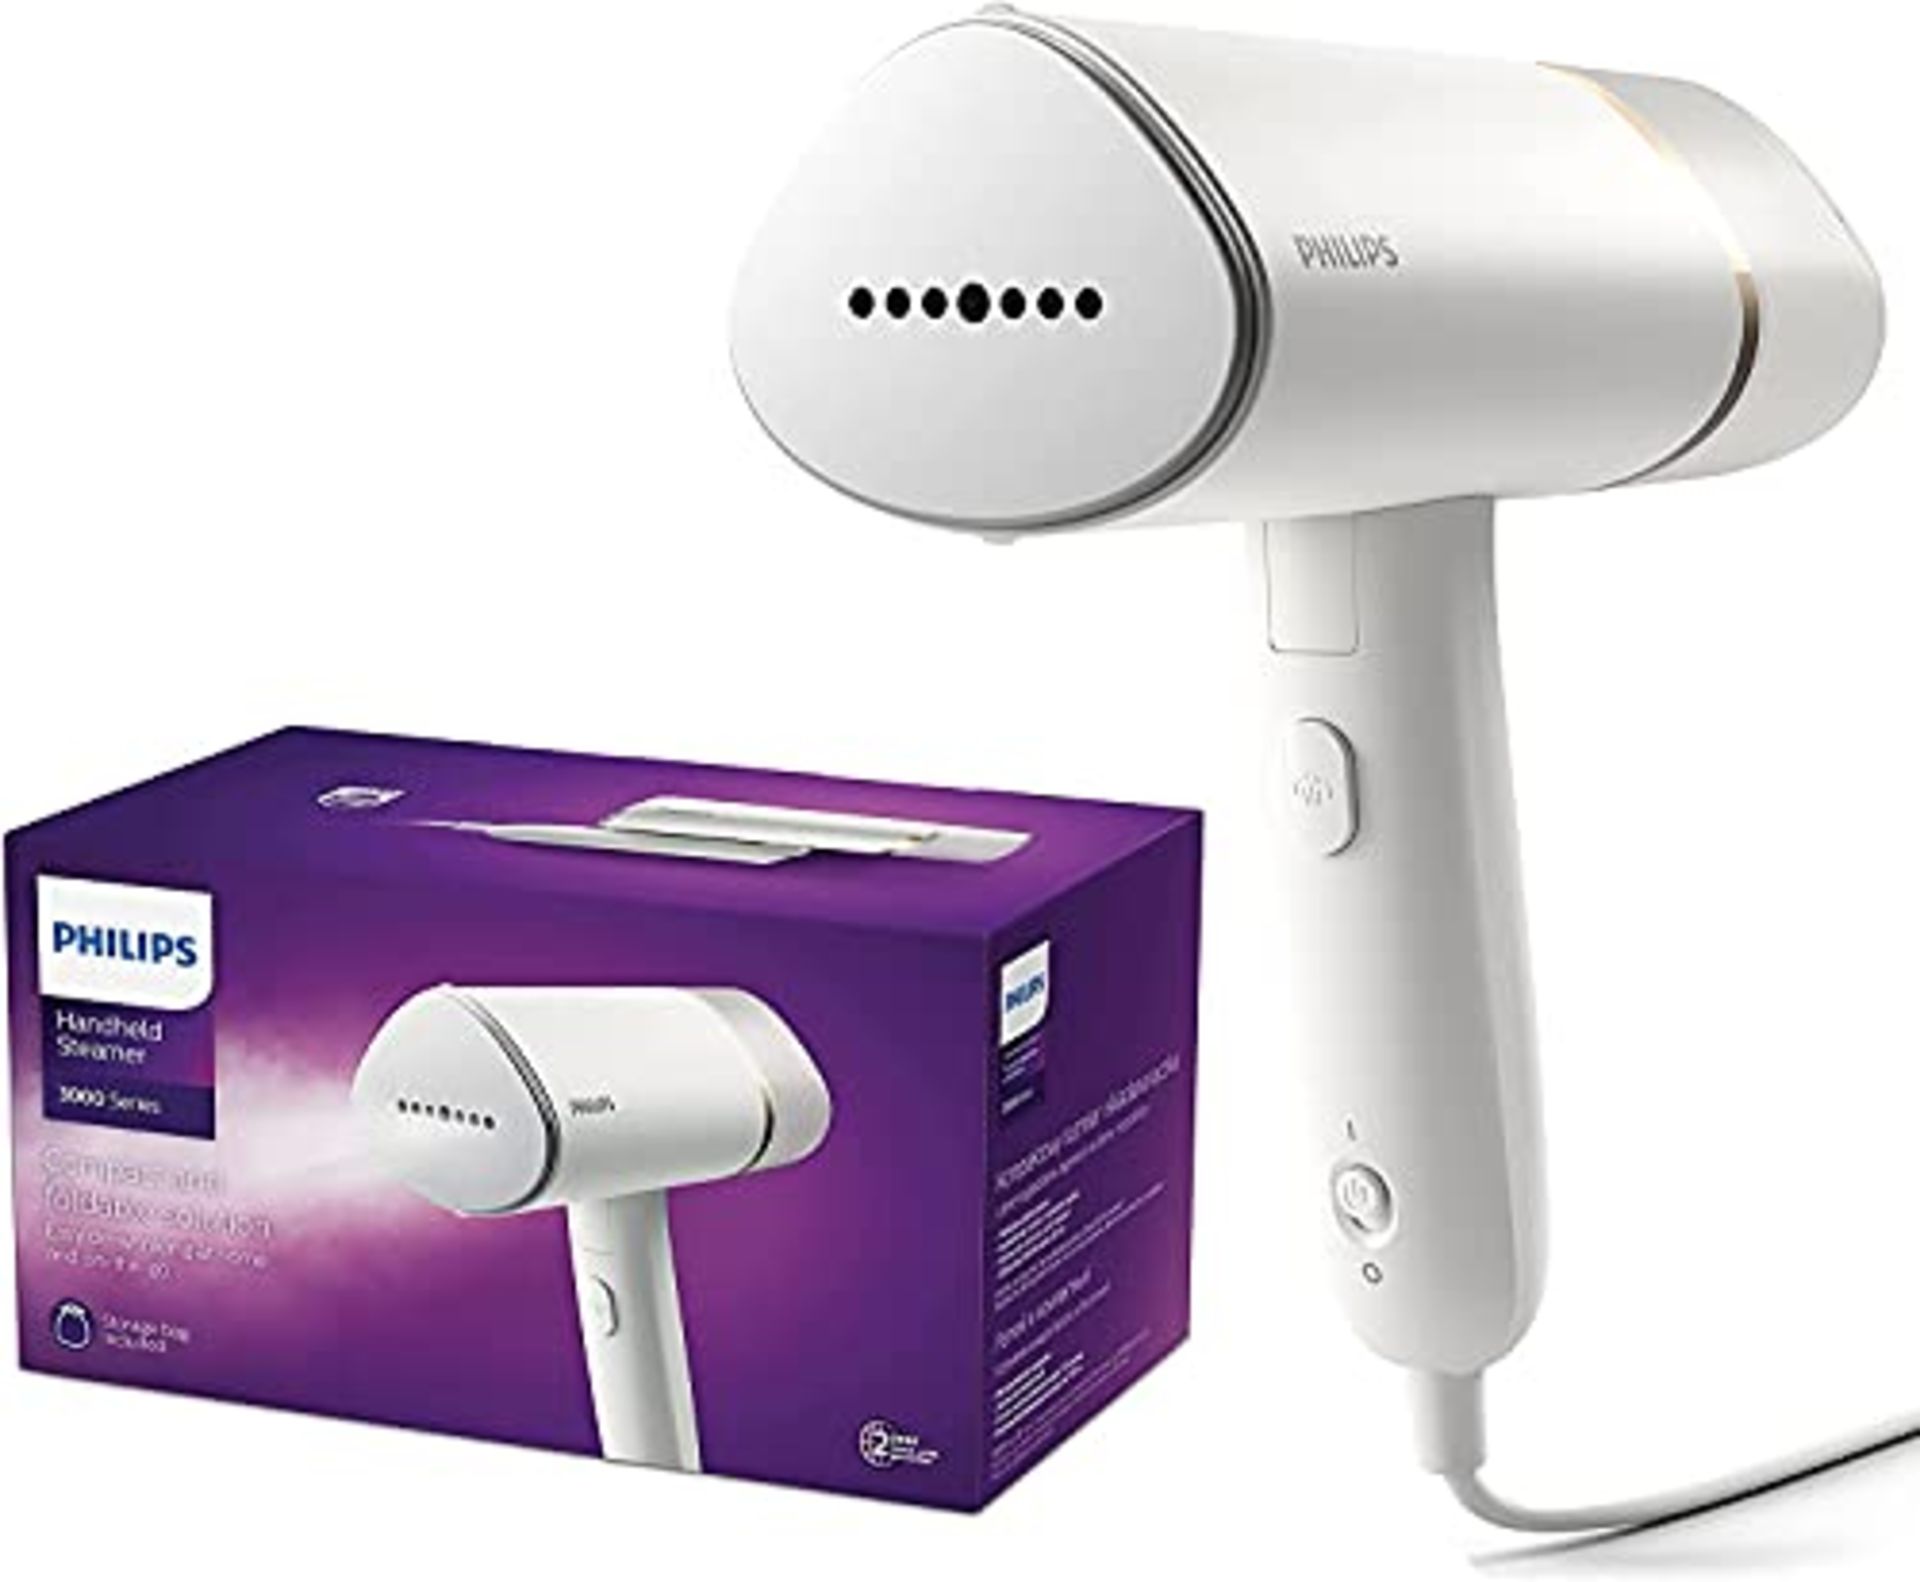 Philips Handheld Steamer 3000 Series, Compact and Foldable, Ready to Use in Ü30 Secon